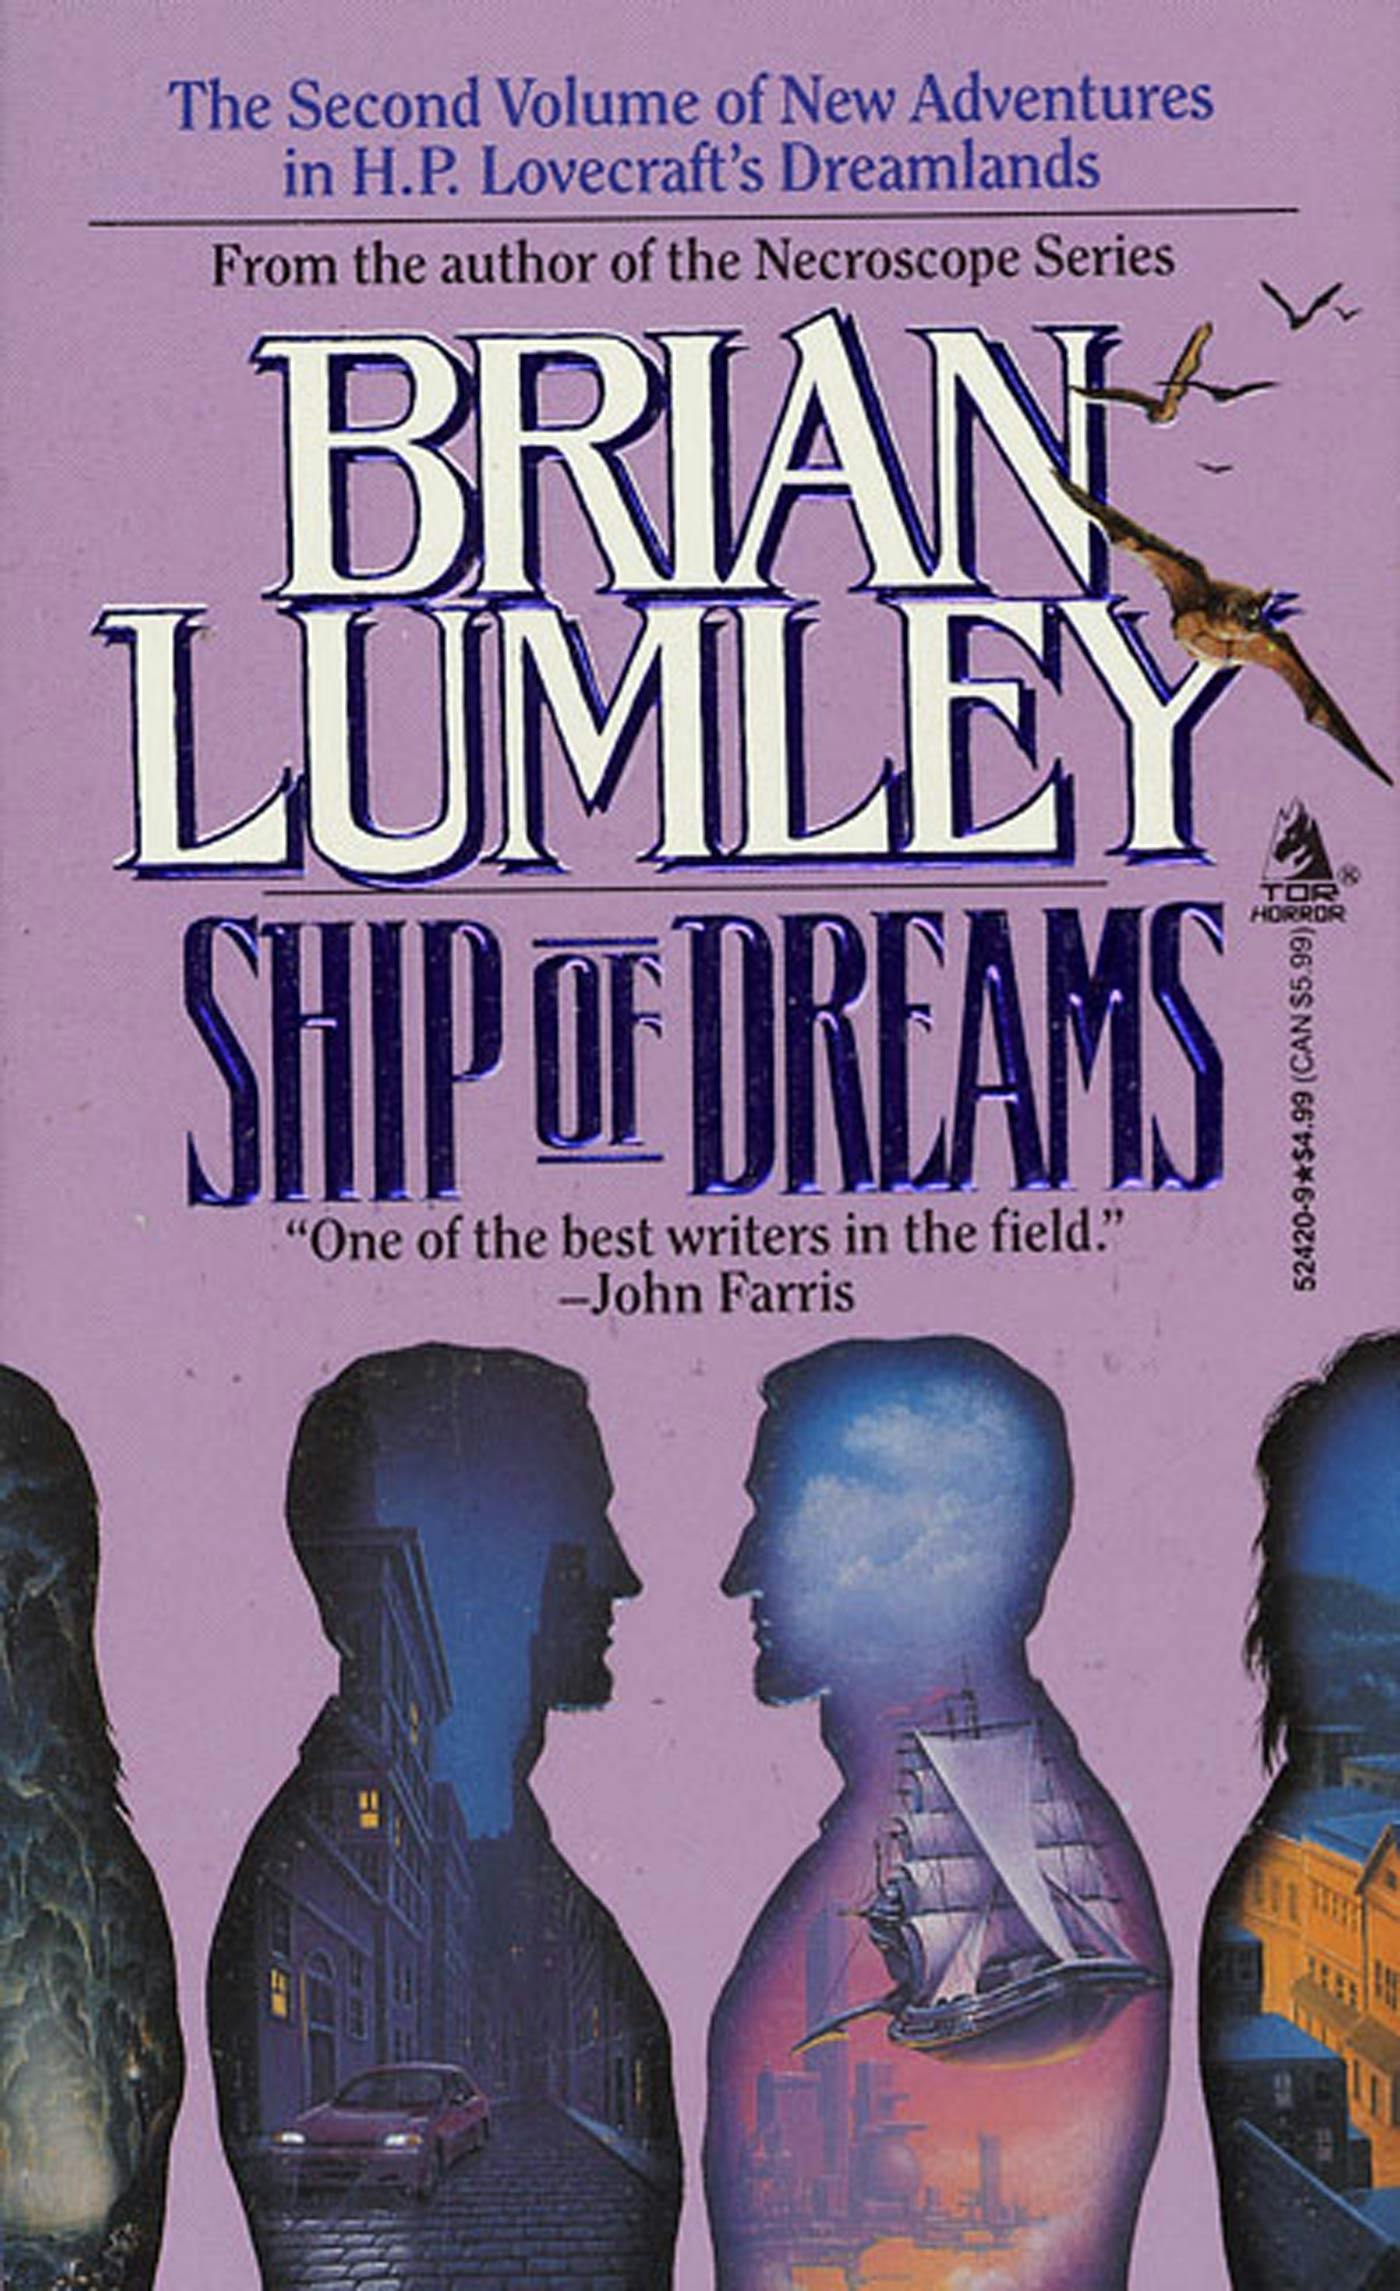 Cover for the book titled as: Ship of Dreams